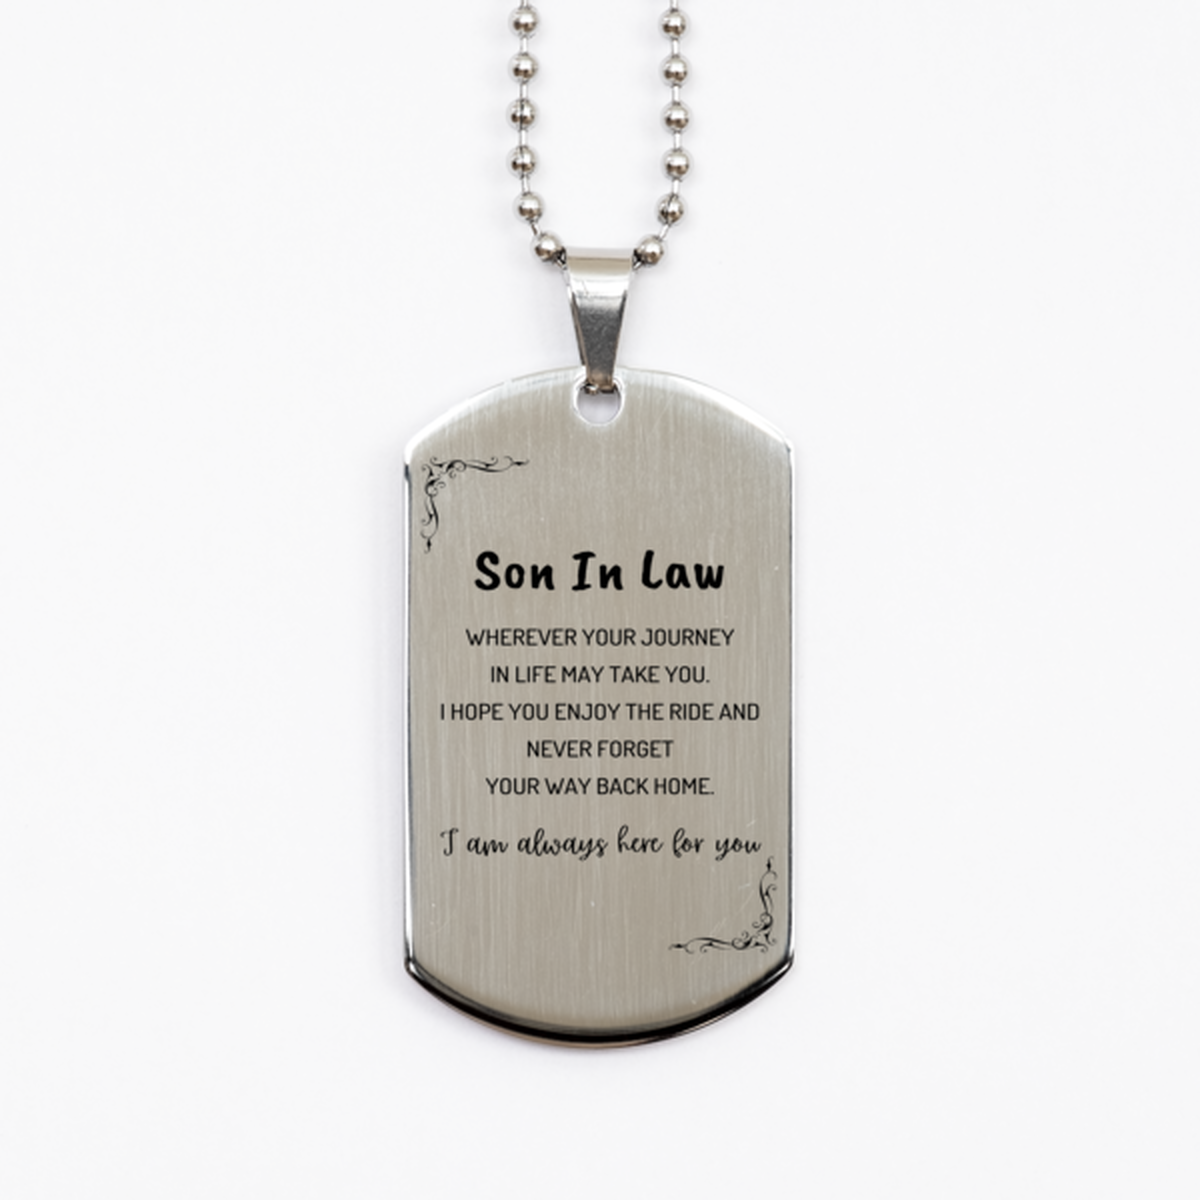 Son In Law wherever your journey in life may take you, I am always here for you Son In Law Silver Dog Tag, Awesome Christmas Gifts For Son In Law, Son In Law Birthday Gifts for Men Women Family Loved One